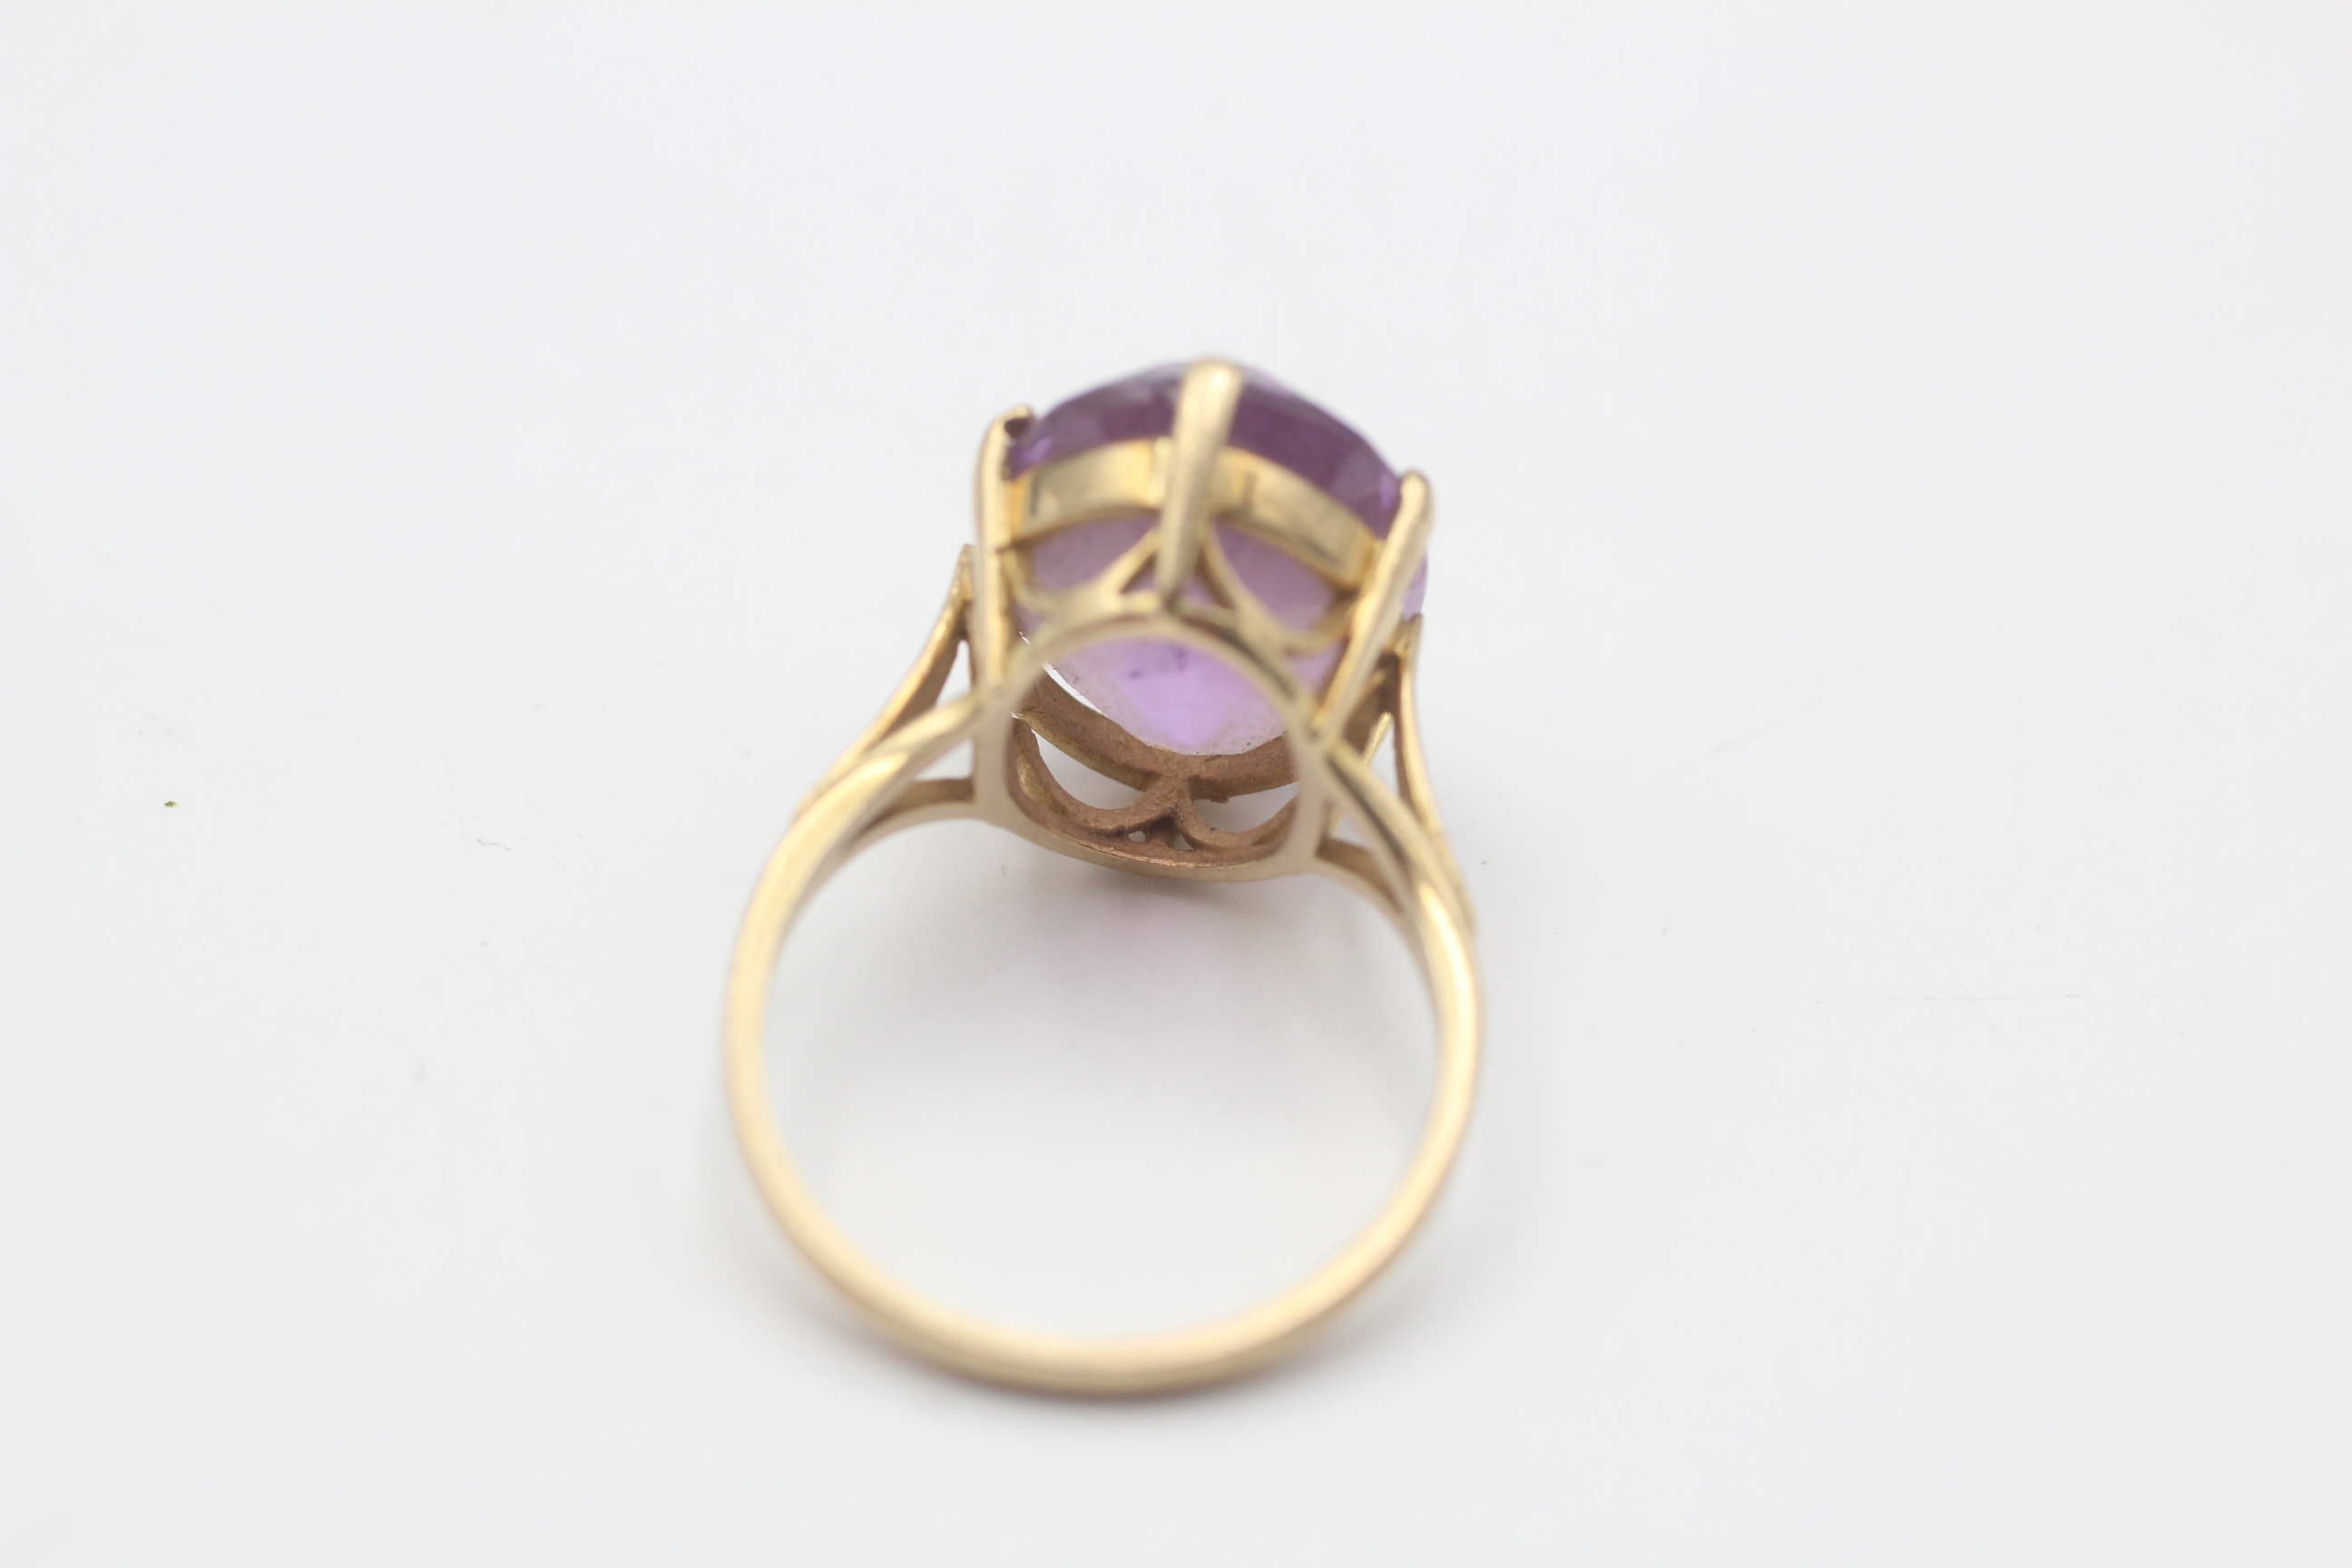 9ct gold vintage amethyst solitaire cocktail ring (4.5g) - Image 4 of 5